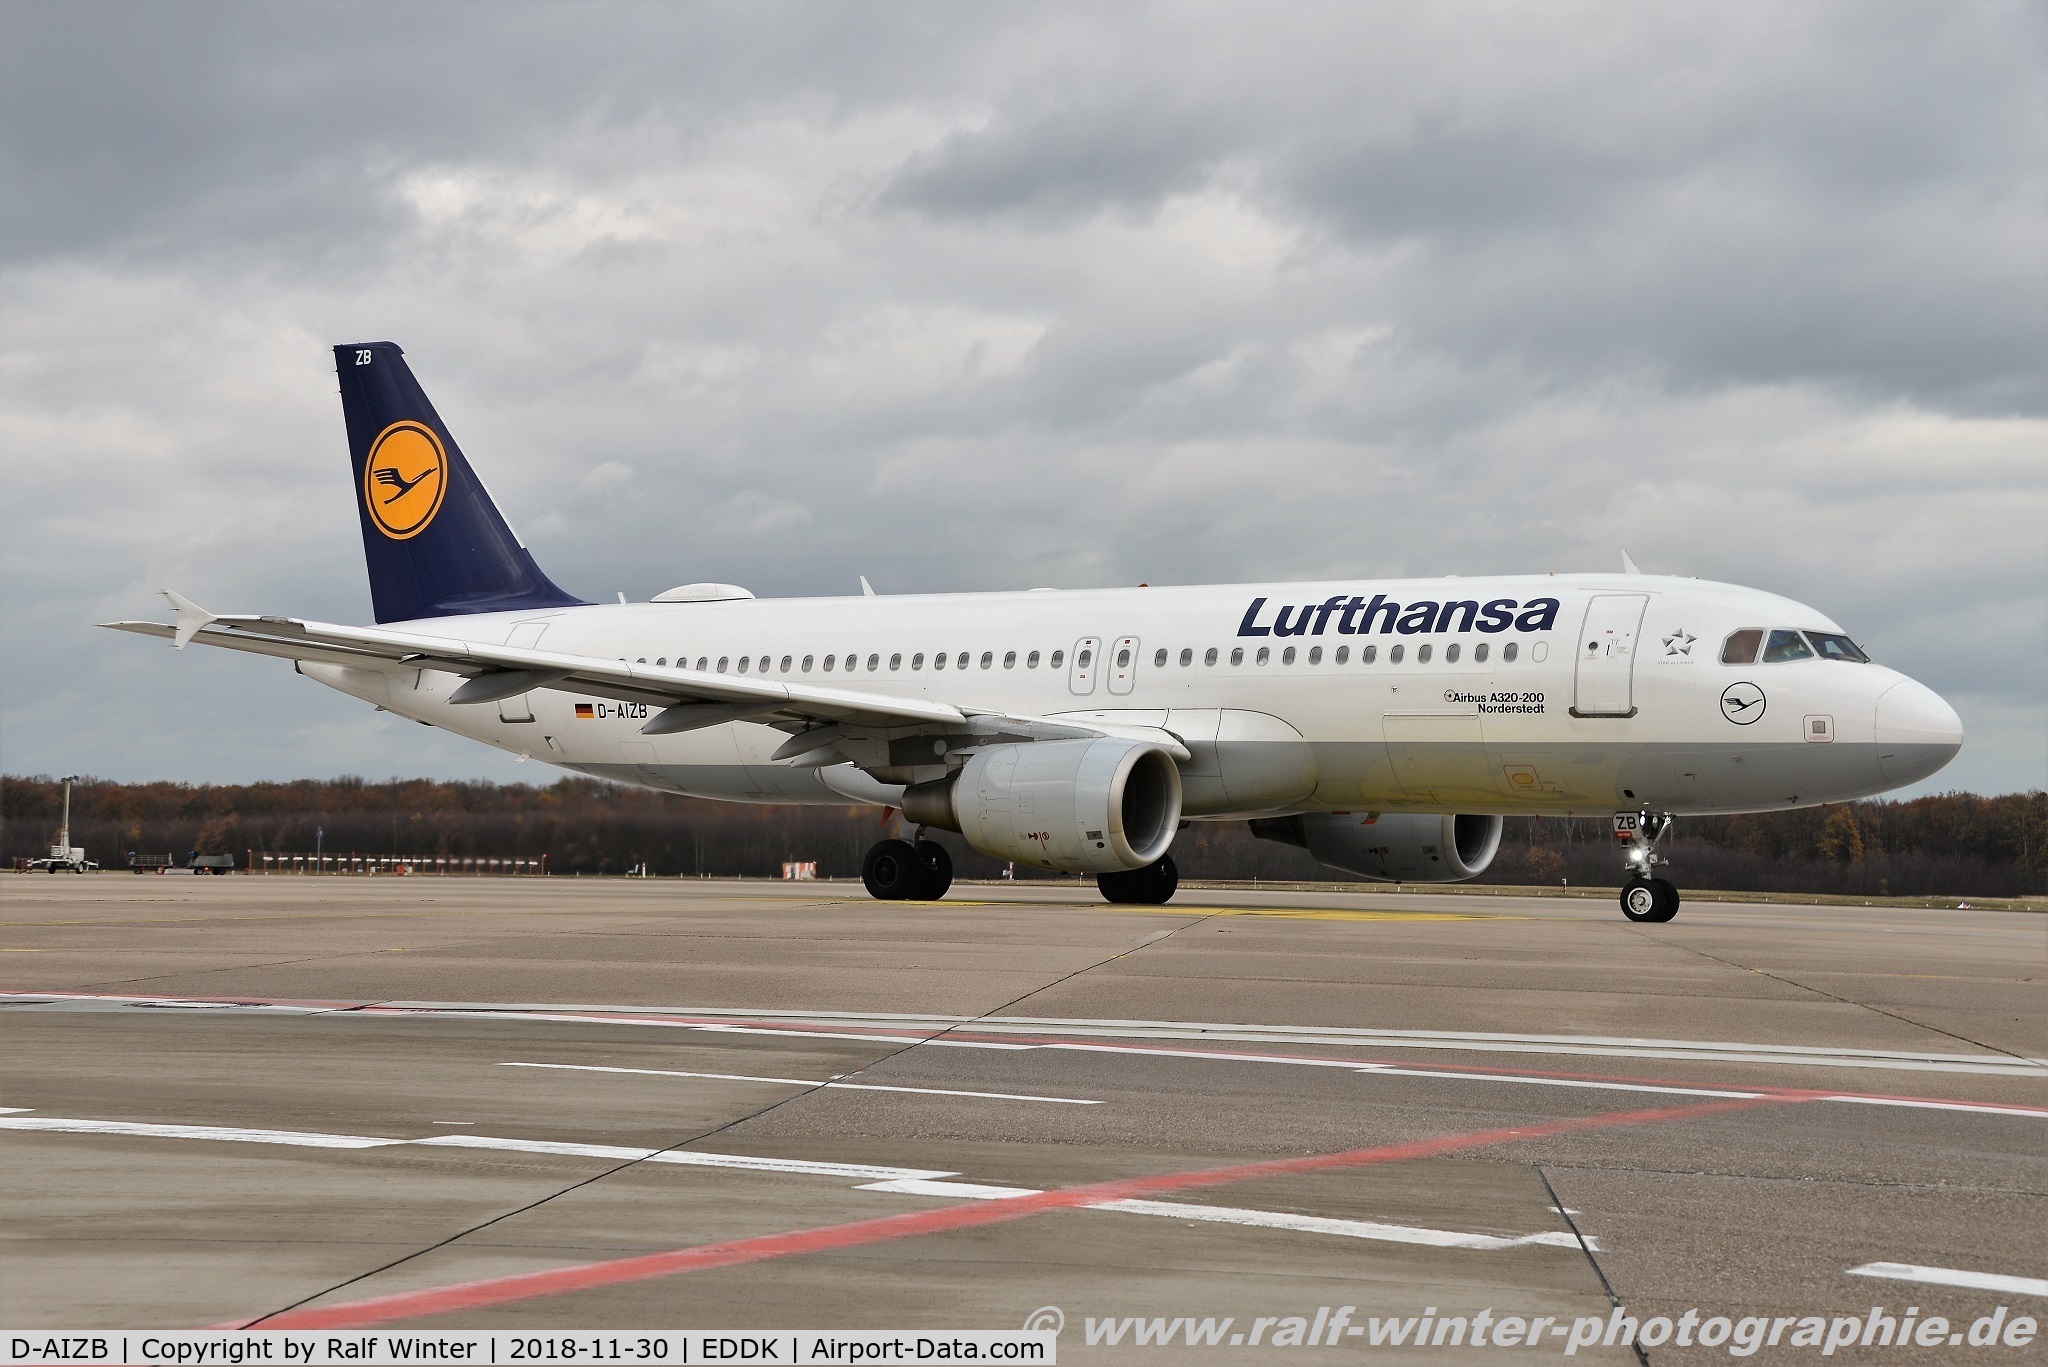 D-AIZB, 2009 Airbus A320-214 C/N 4120, Airbus A320-214 - LH DLH Lufthansa 'Norderstedt' - 4120 - D-AIZB - 30.11.2018 - CGN